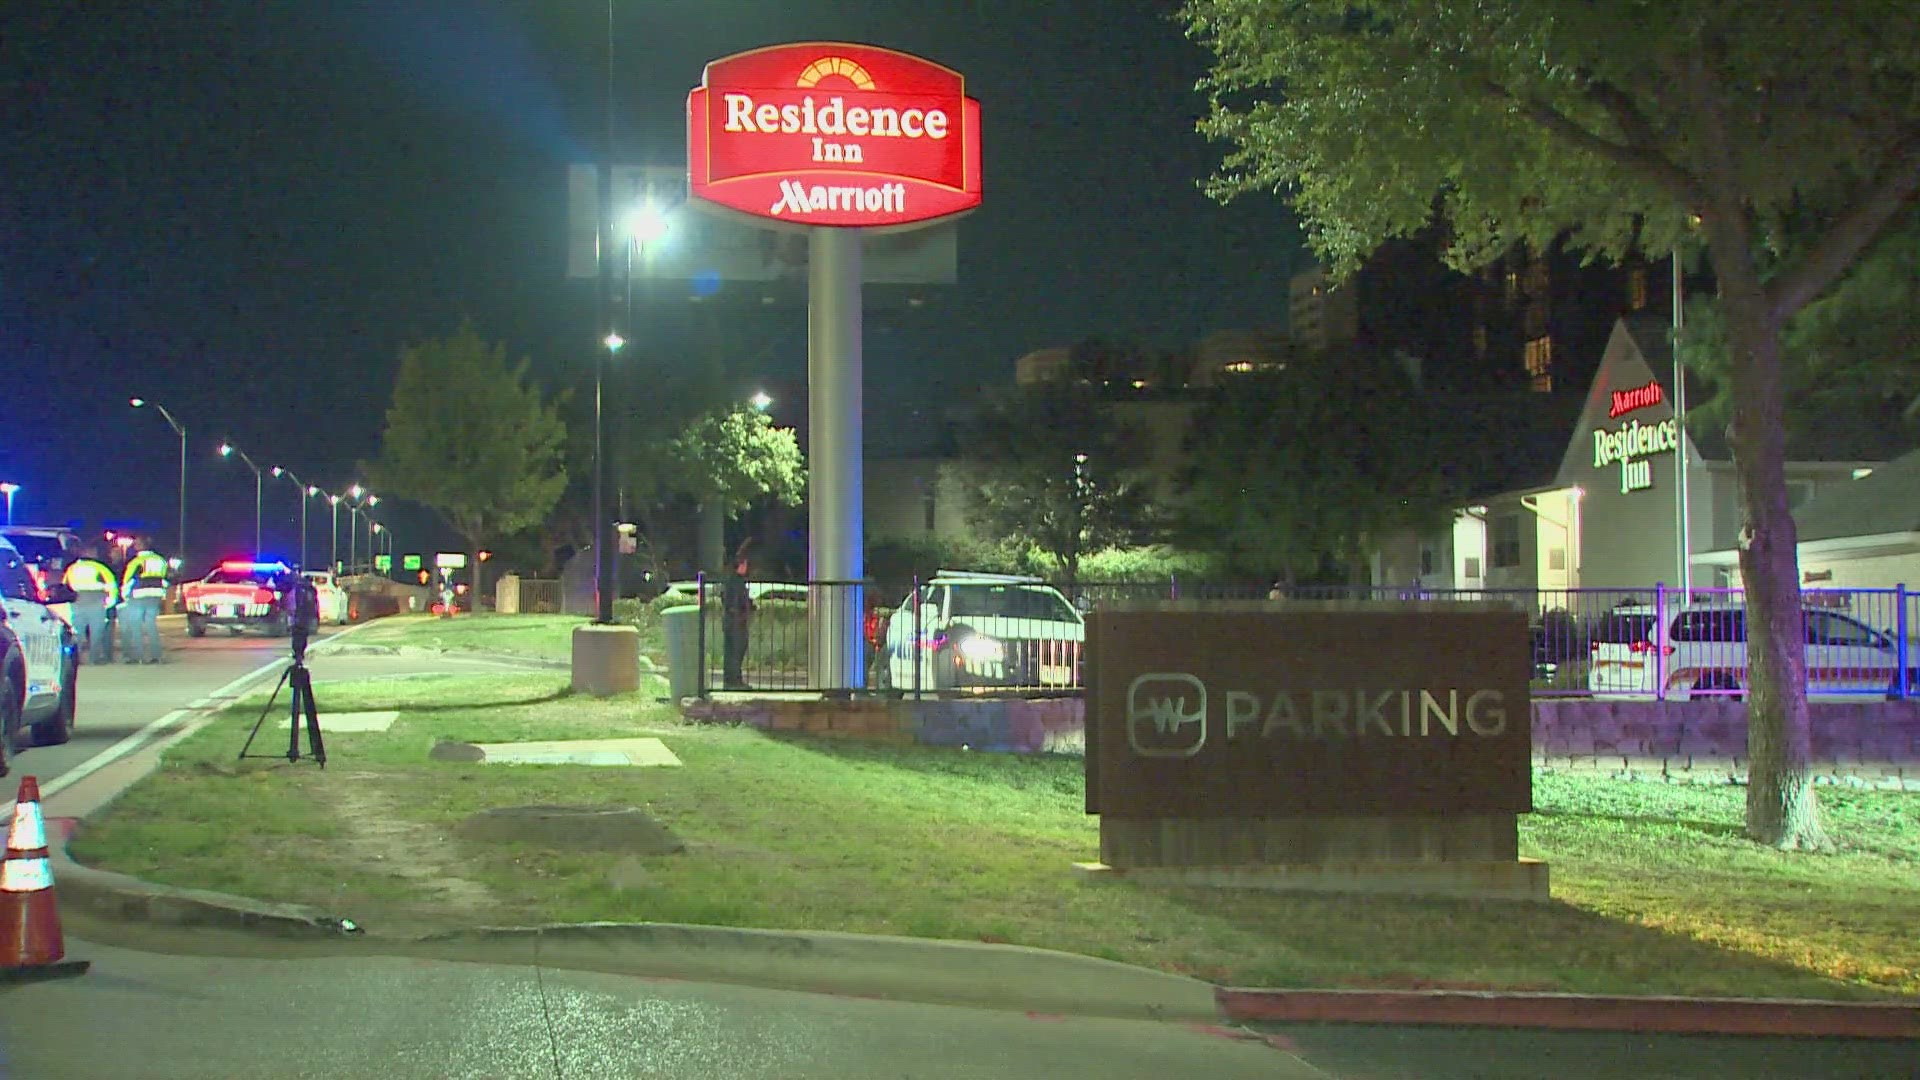 The incident happened around 12:20 a.m. in the 7600 block of LBJ Freeway Service Road. That's near the Residence Inn by Park Central Drive in North Dallas.